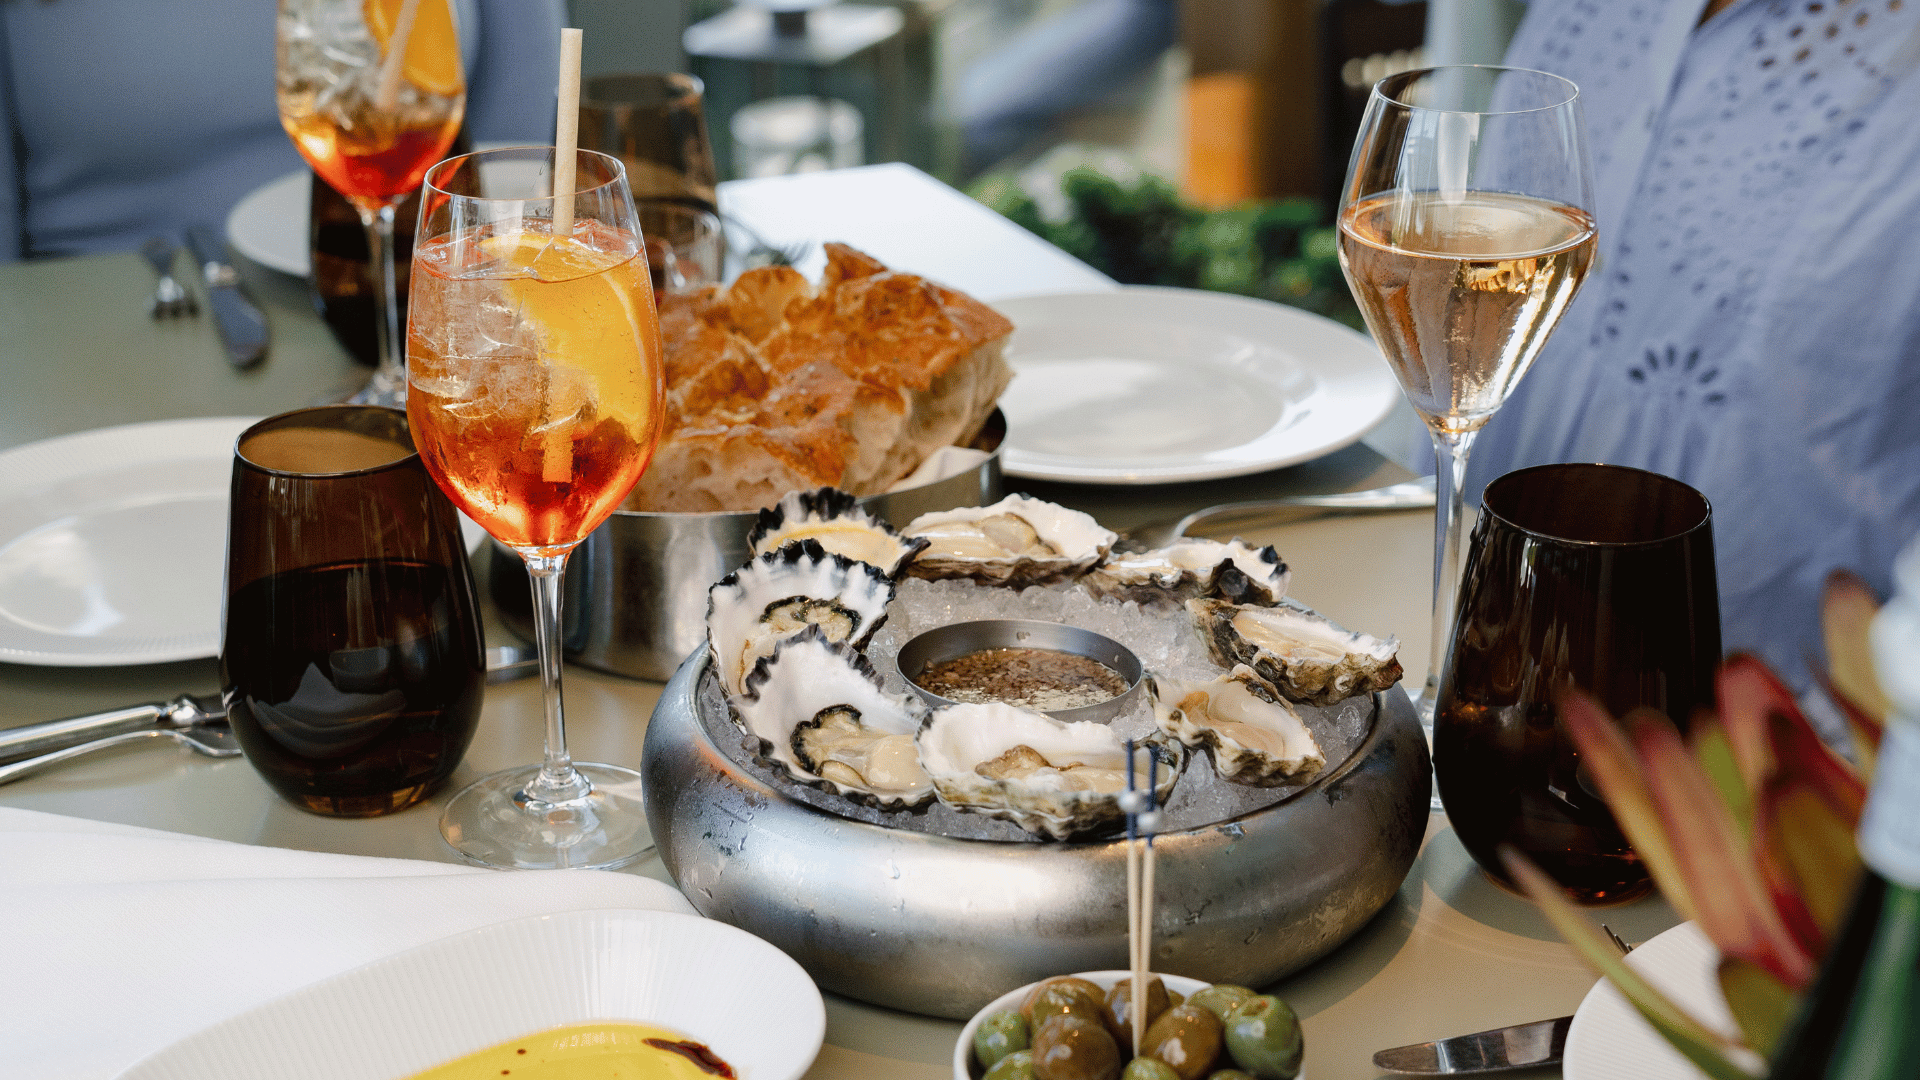 Oysters, focaccia and drinks at a'Mare Cucinetta.